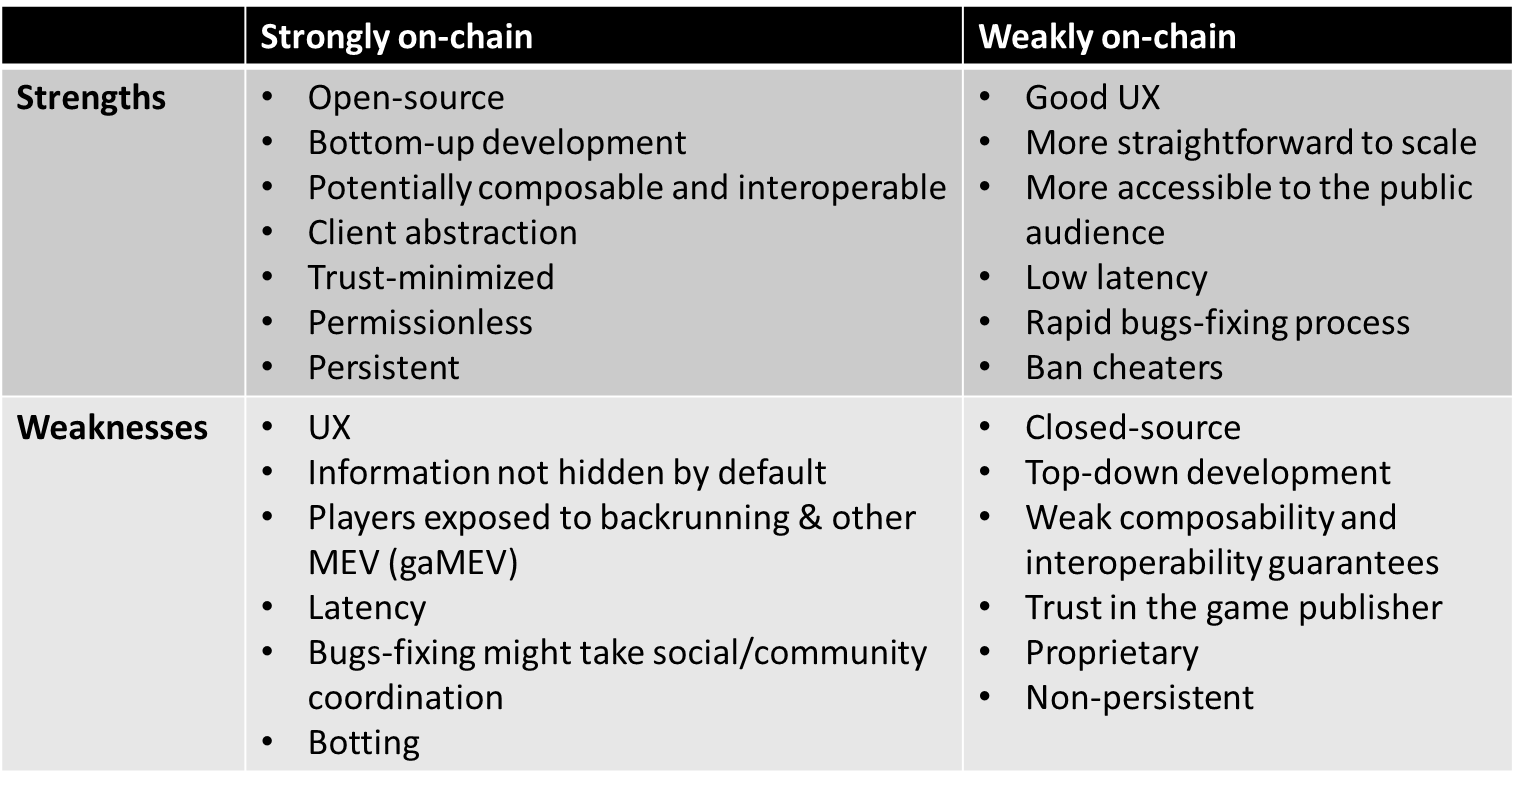 Strengths and Weaknesses of on-chain games from "Thoughts on on-chain gaming"